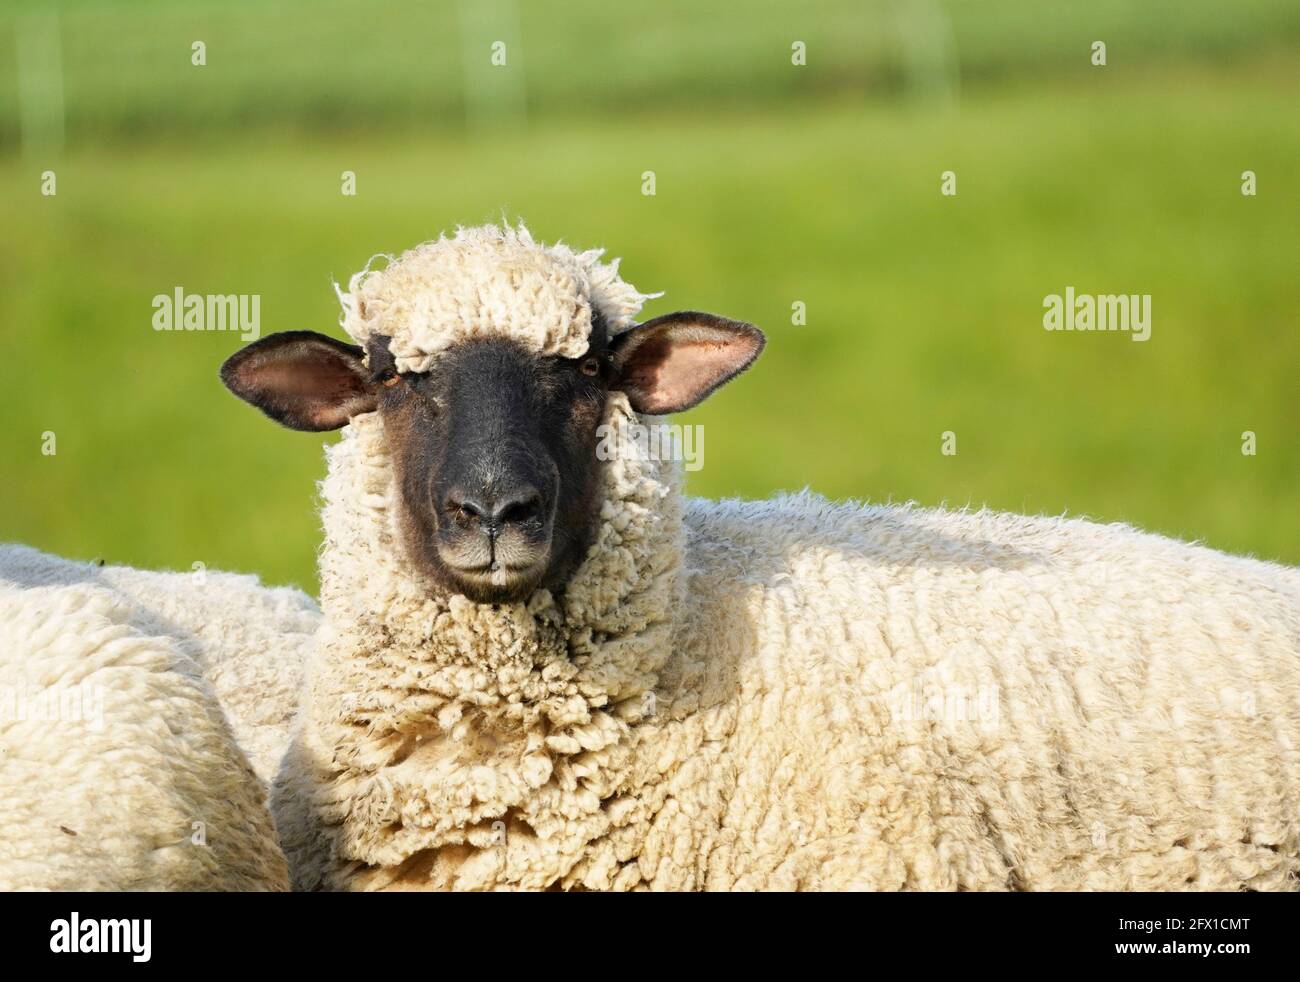 Sheep on a green meadow. Grazing animal with light wool. Stock Photo